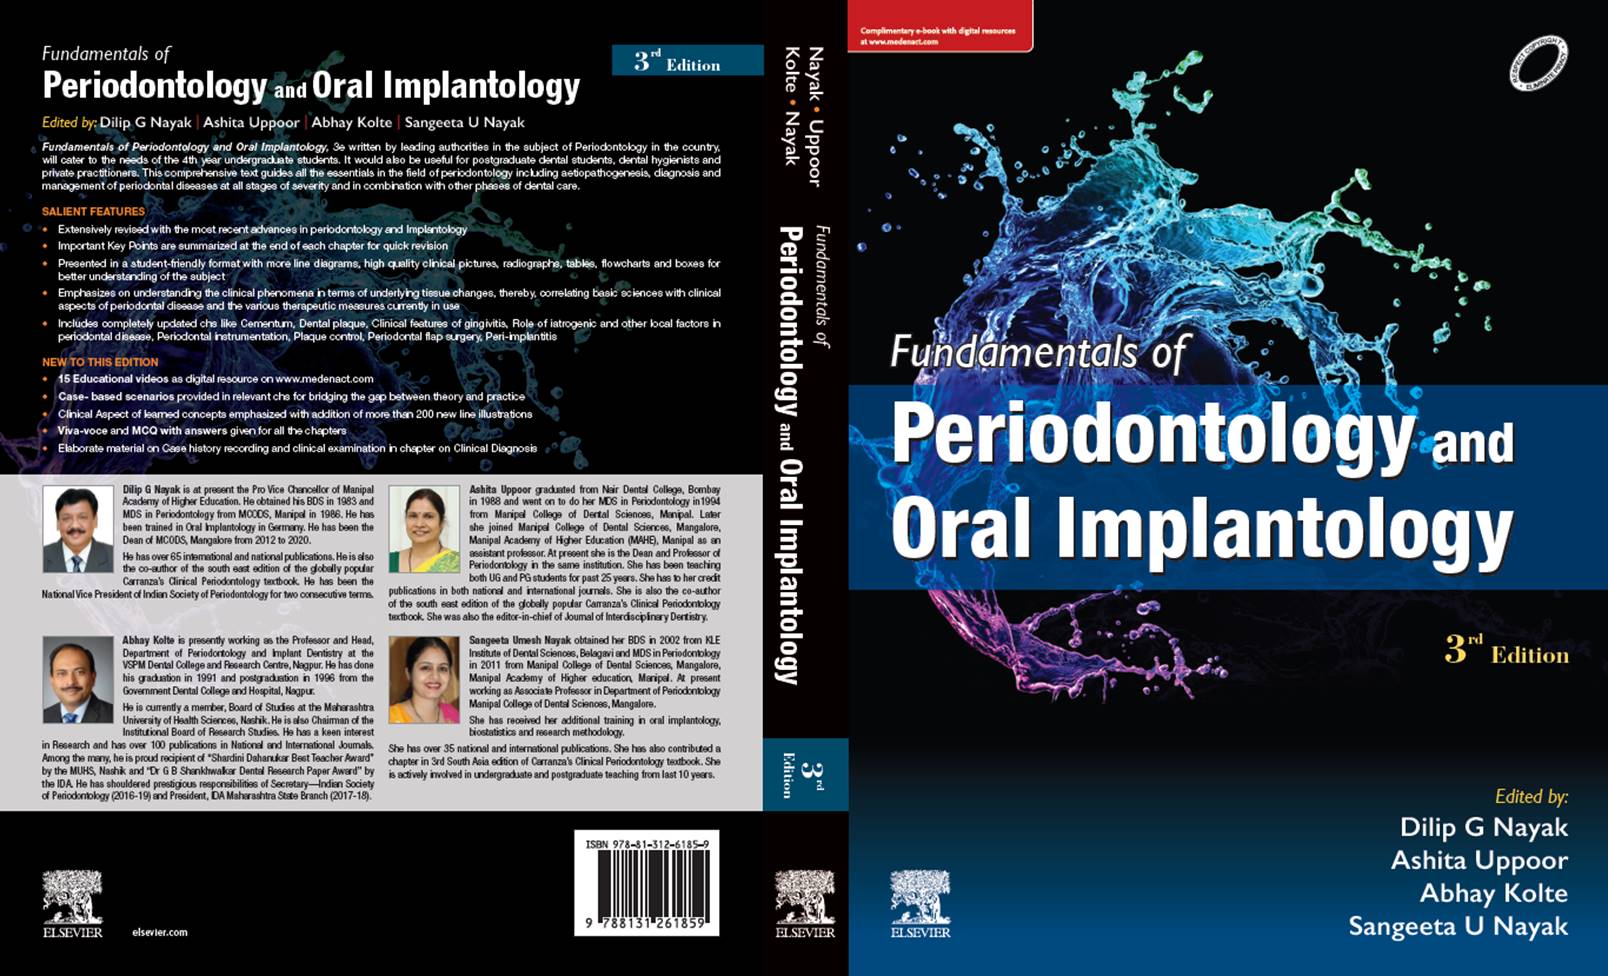 Fundamentals of Periodontology and Oral Implantology, 3e